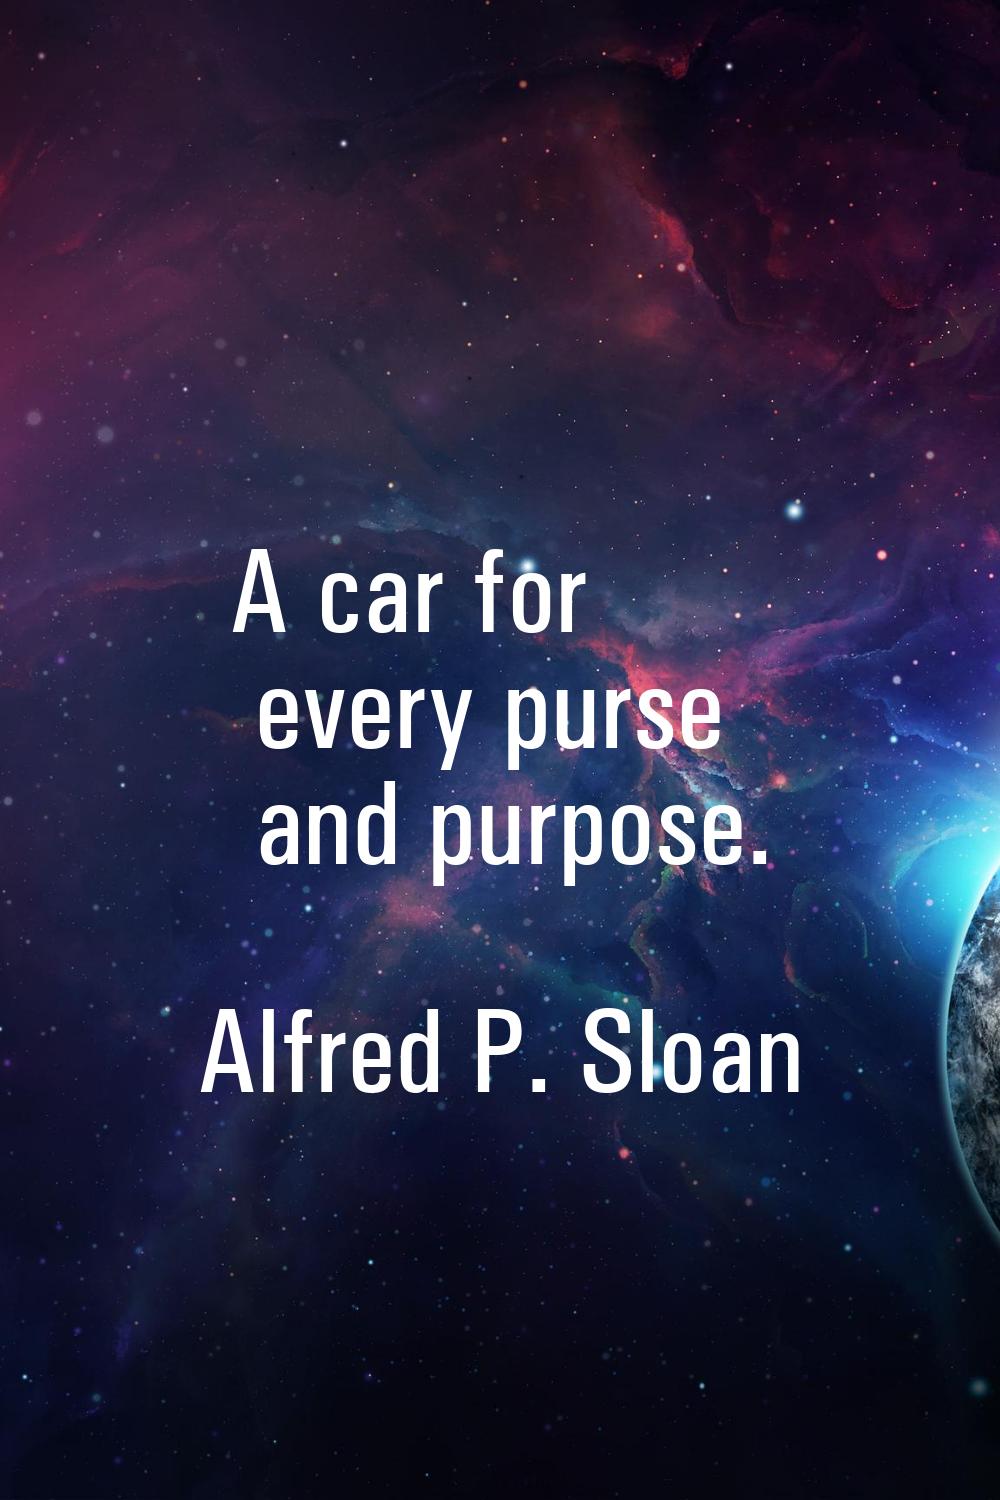 A car for every purse and purpose.